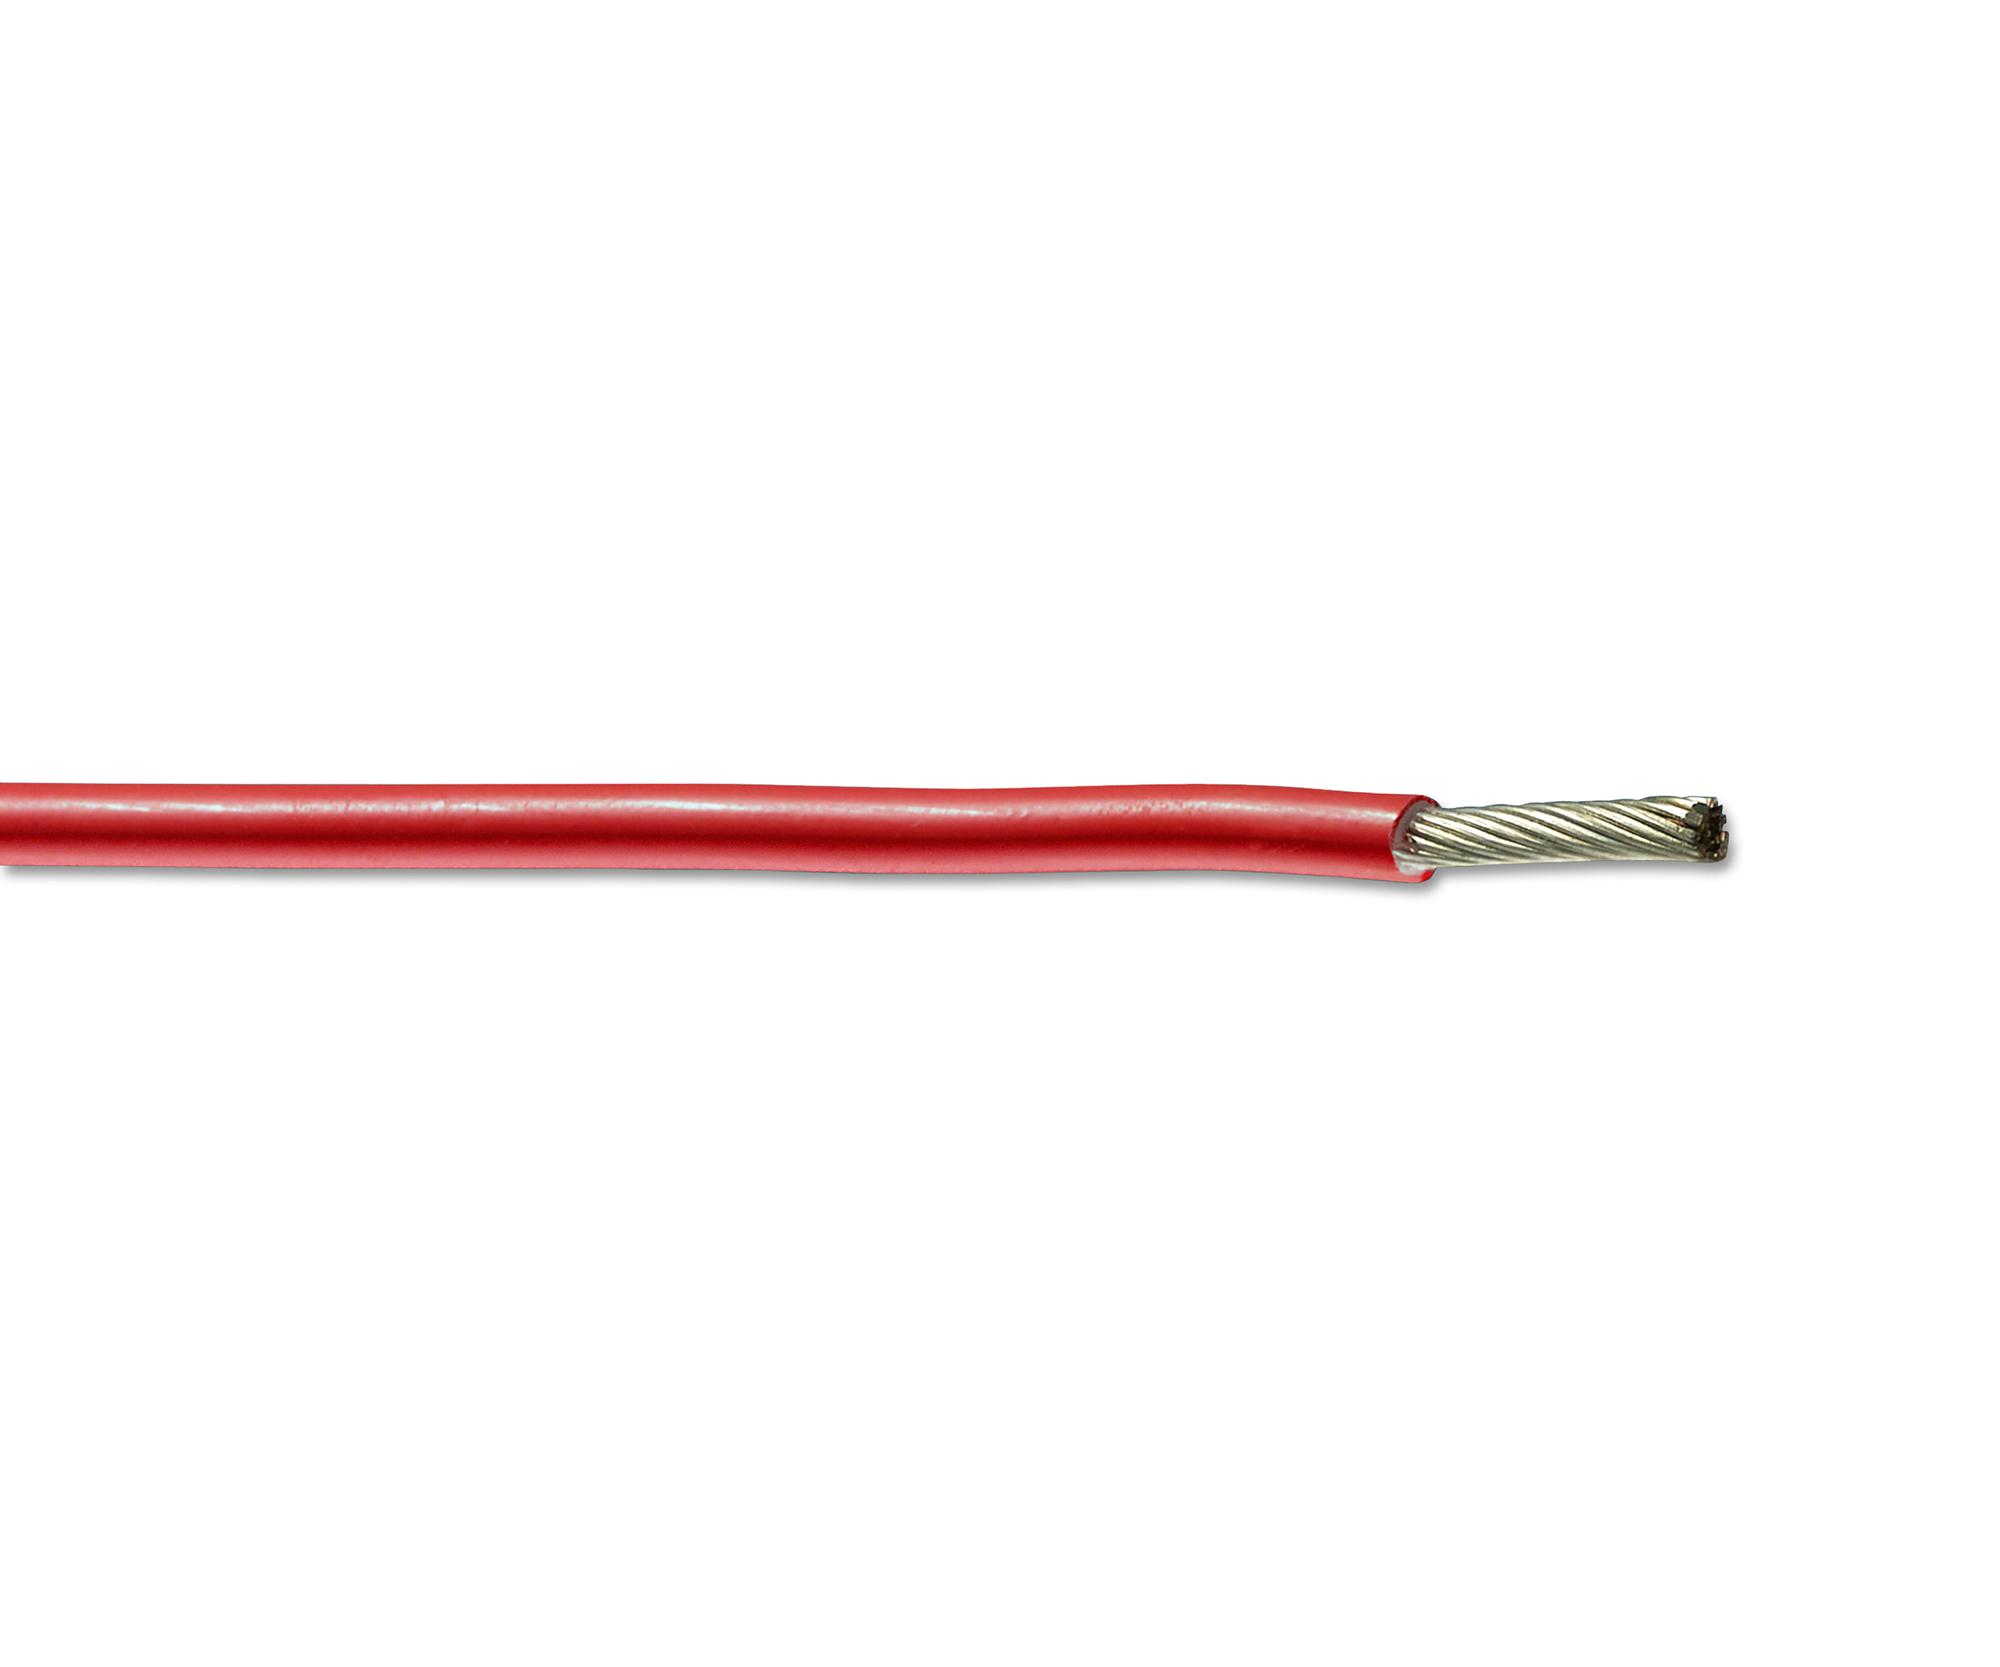 Raychem / Te Connectivity 44A0111-22-2 Wire, 22Awg, Red, 100M